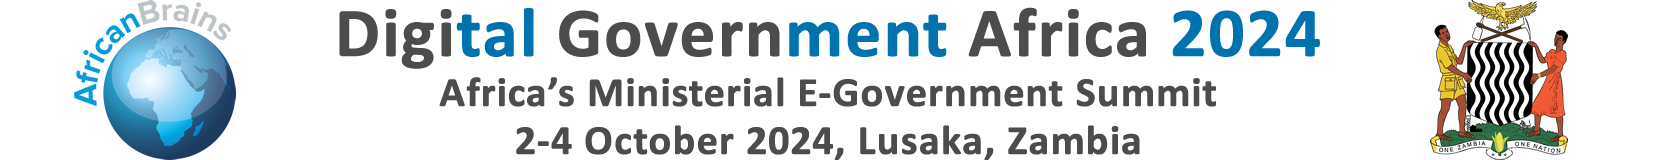 Digital Government Africa 2024